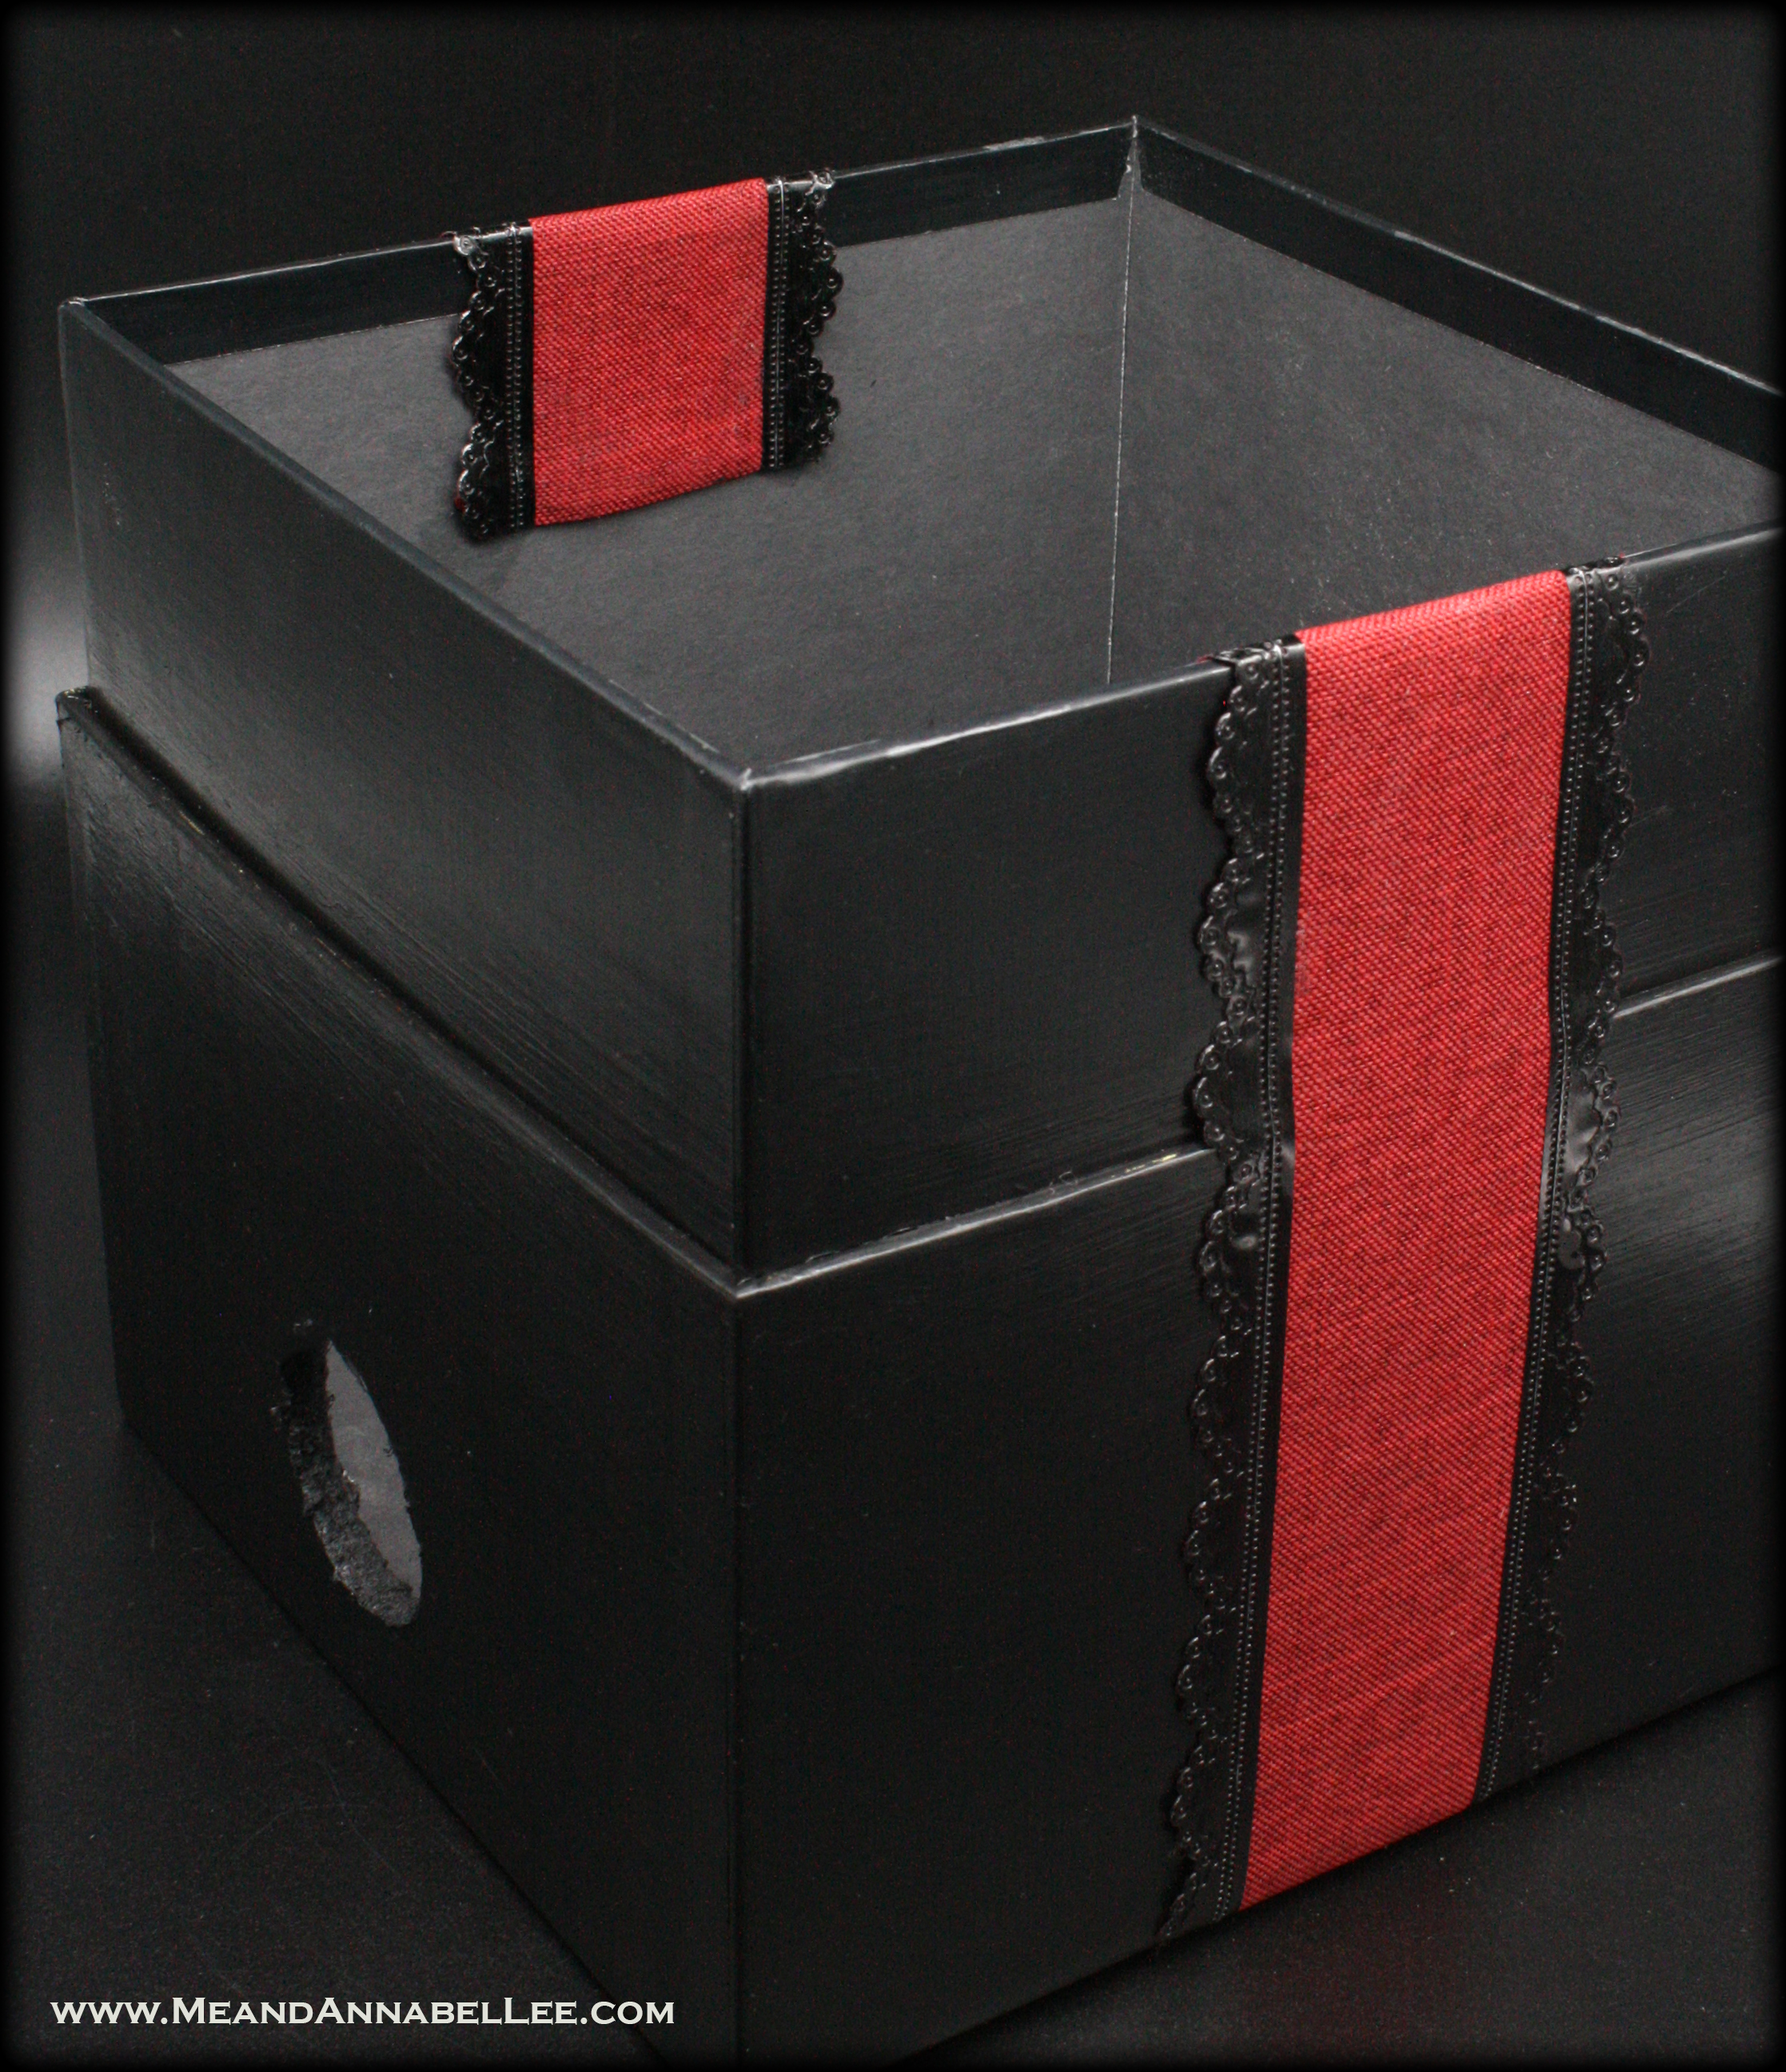 Red & Black Gothic Boxed wine dispenser | How to build a DIY Holiday Boxed Wine Dispenser |Wrapped Gift Box Upcycle | www.MeandAnnabelLee.com